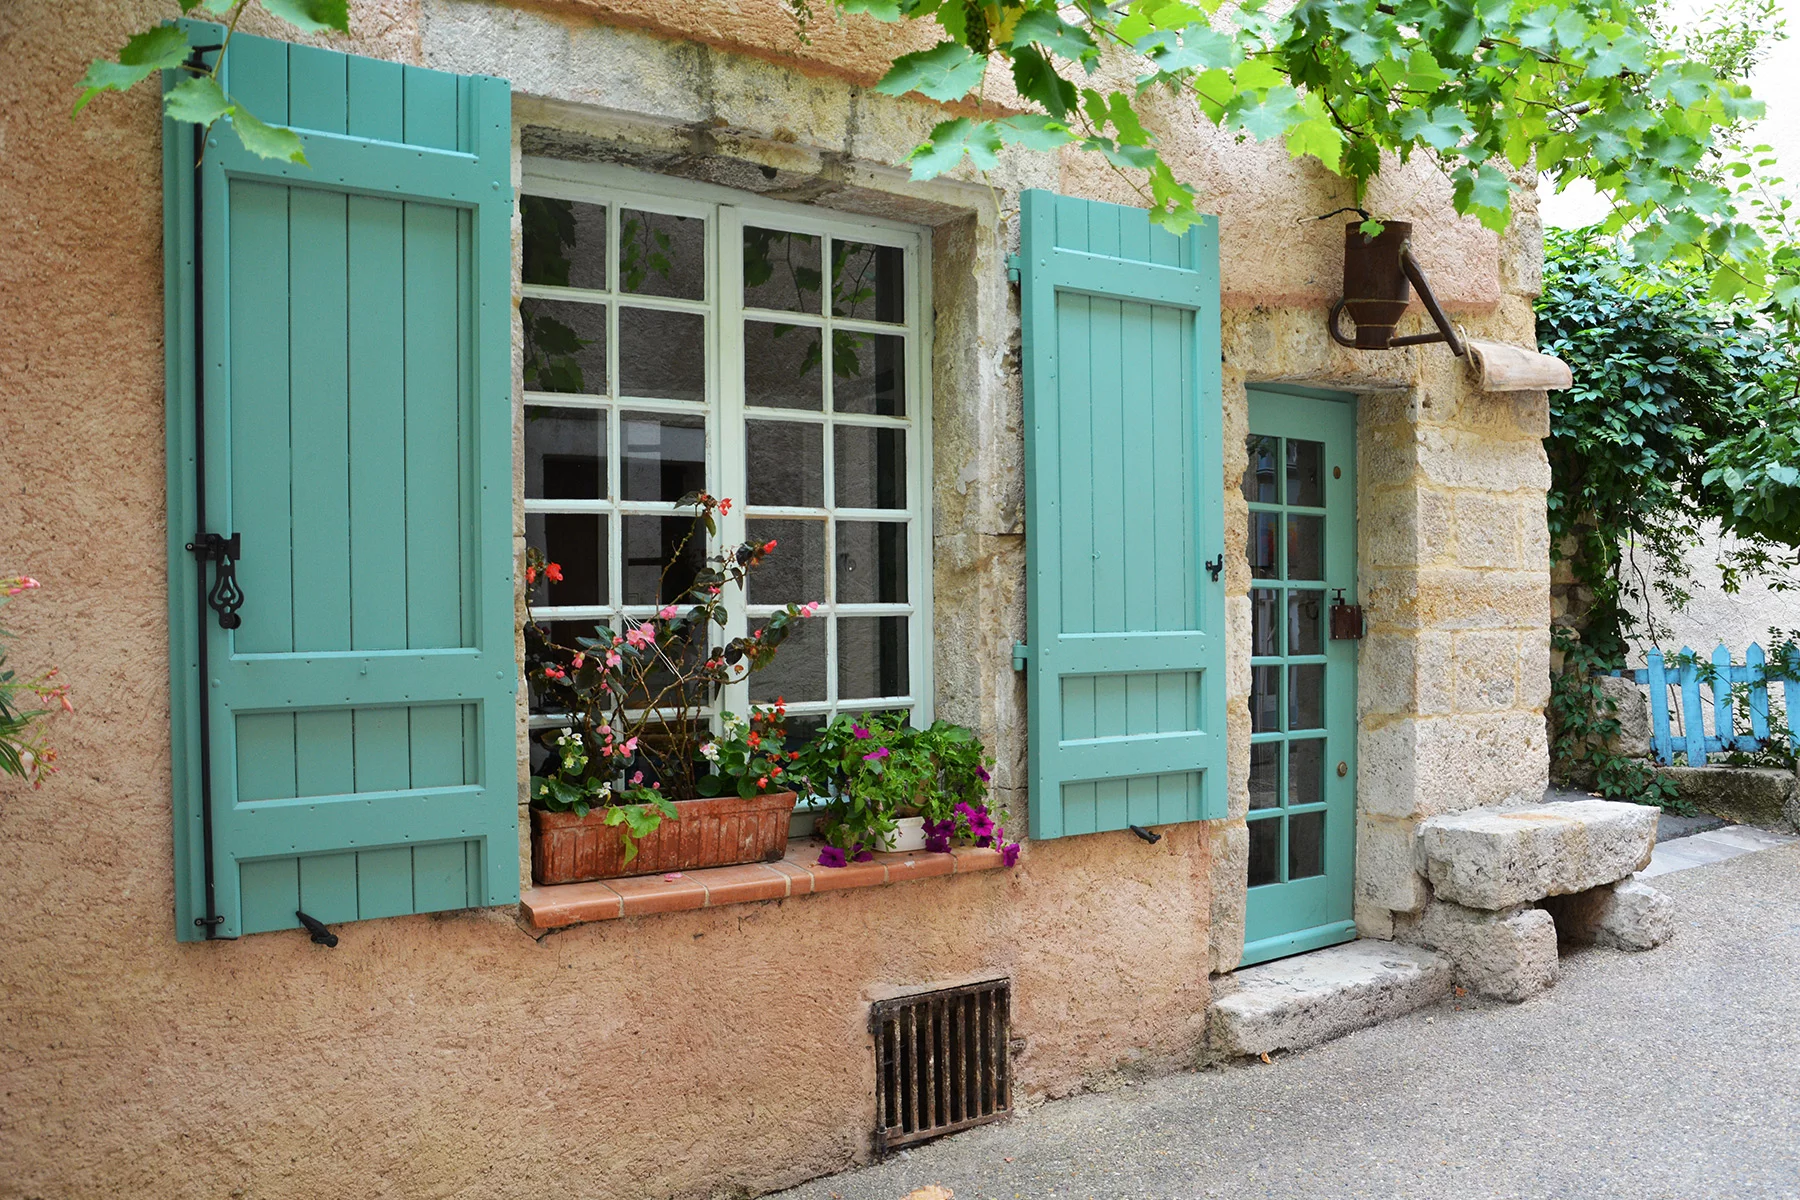 An old house in Provence with mint green shutters on the windows